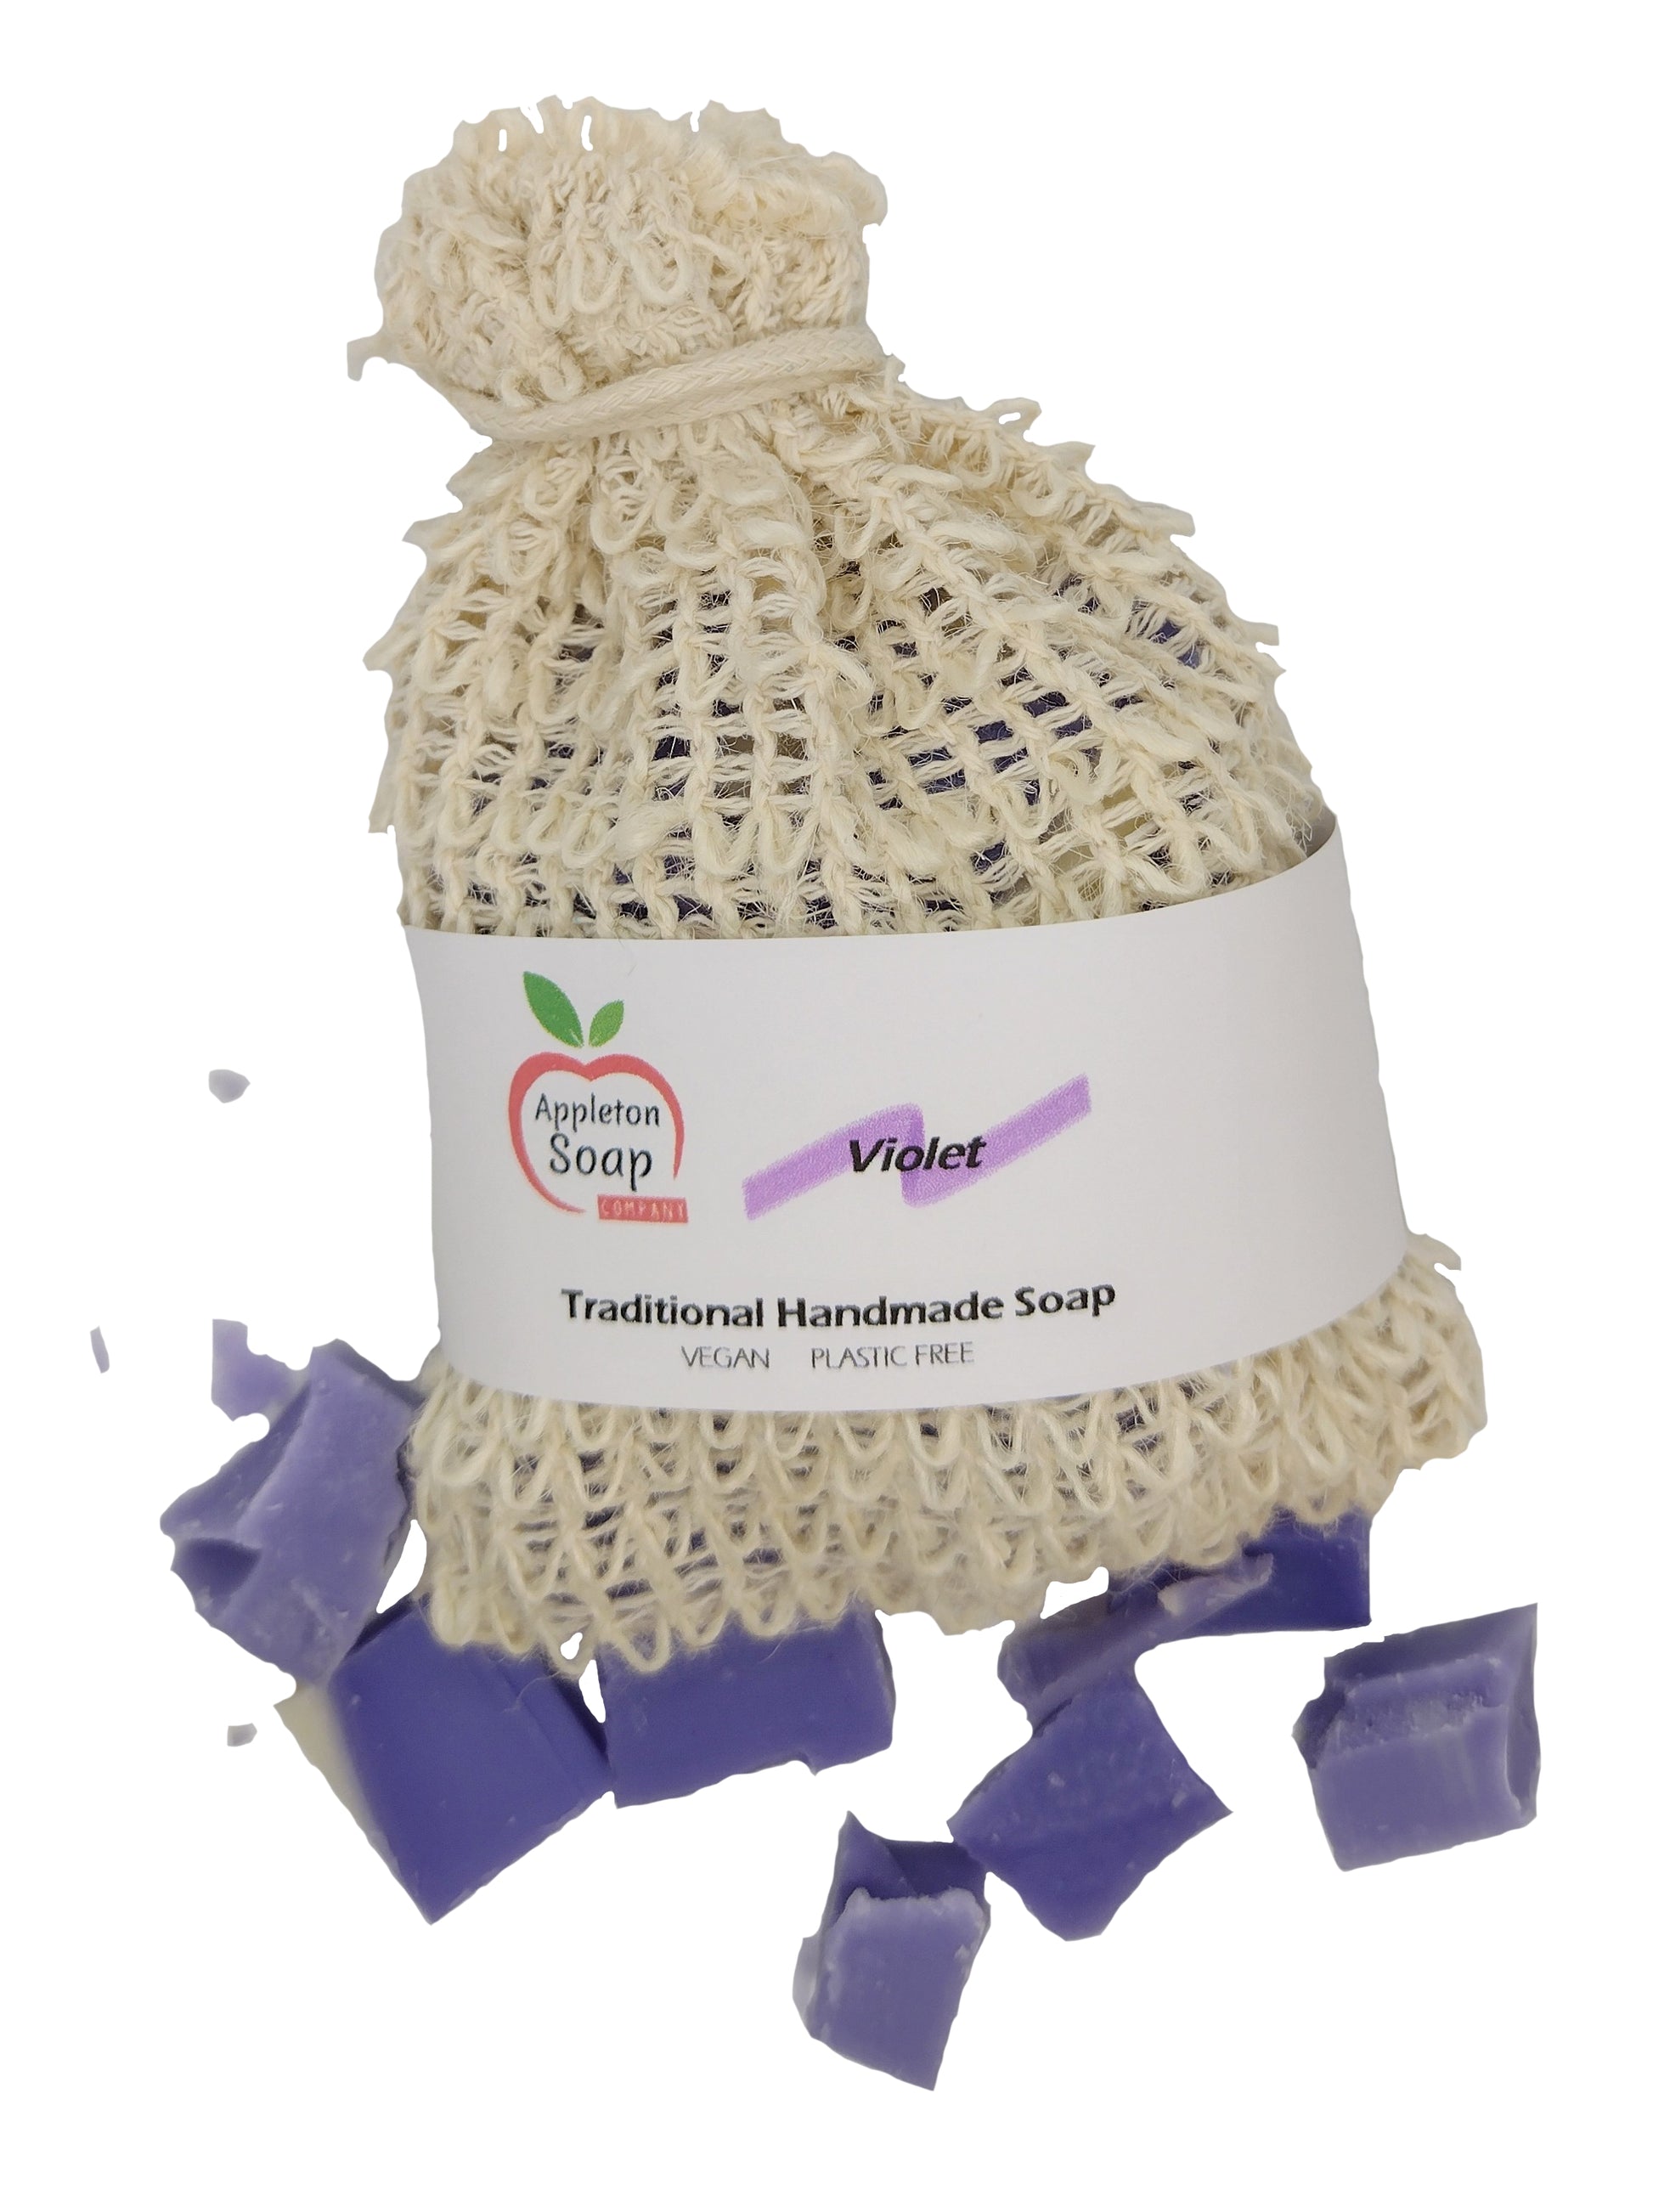 Cream sisal bag with white wrap around label with violet soap scraps